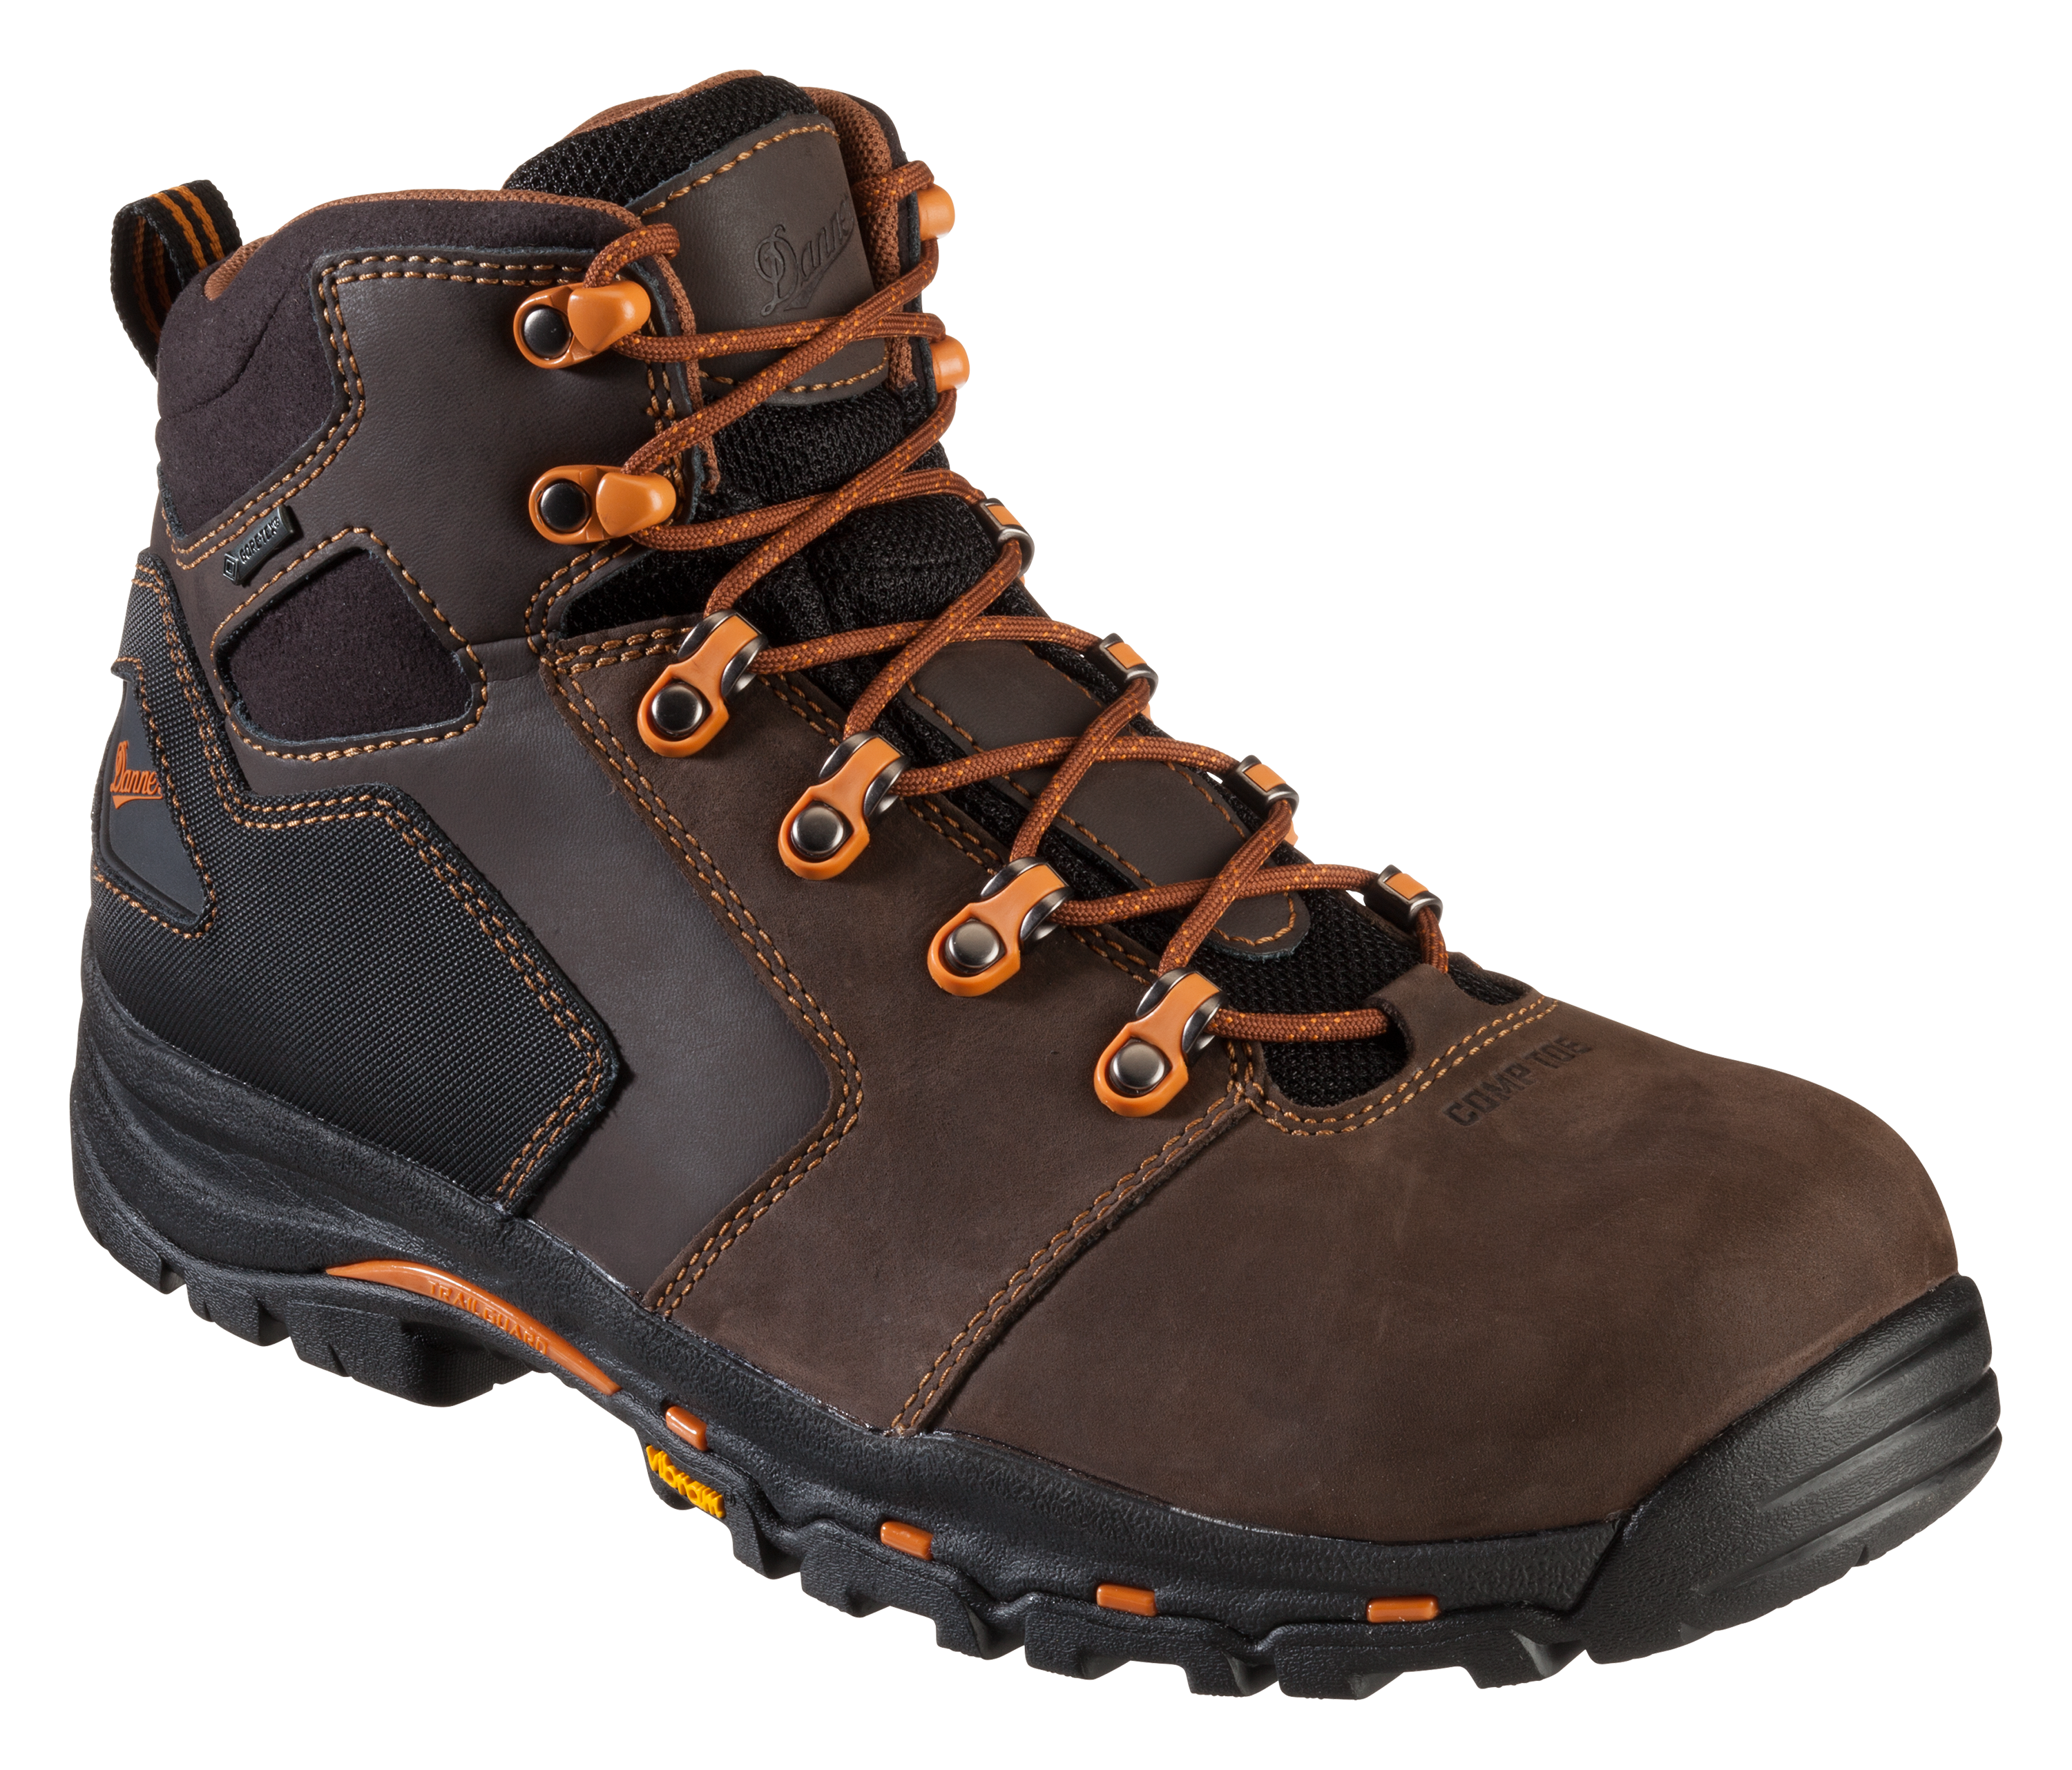 Danner Vicious GORE-TEX Non-Metallic Safety Toe Work Boots for Men - Brown - 10.5M